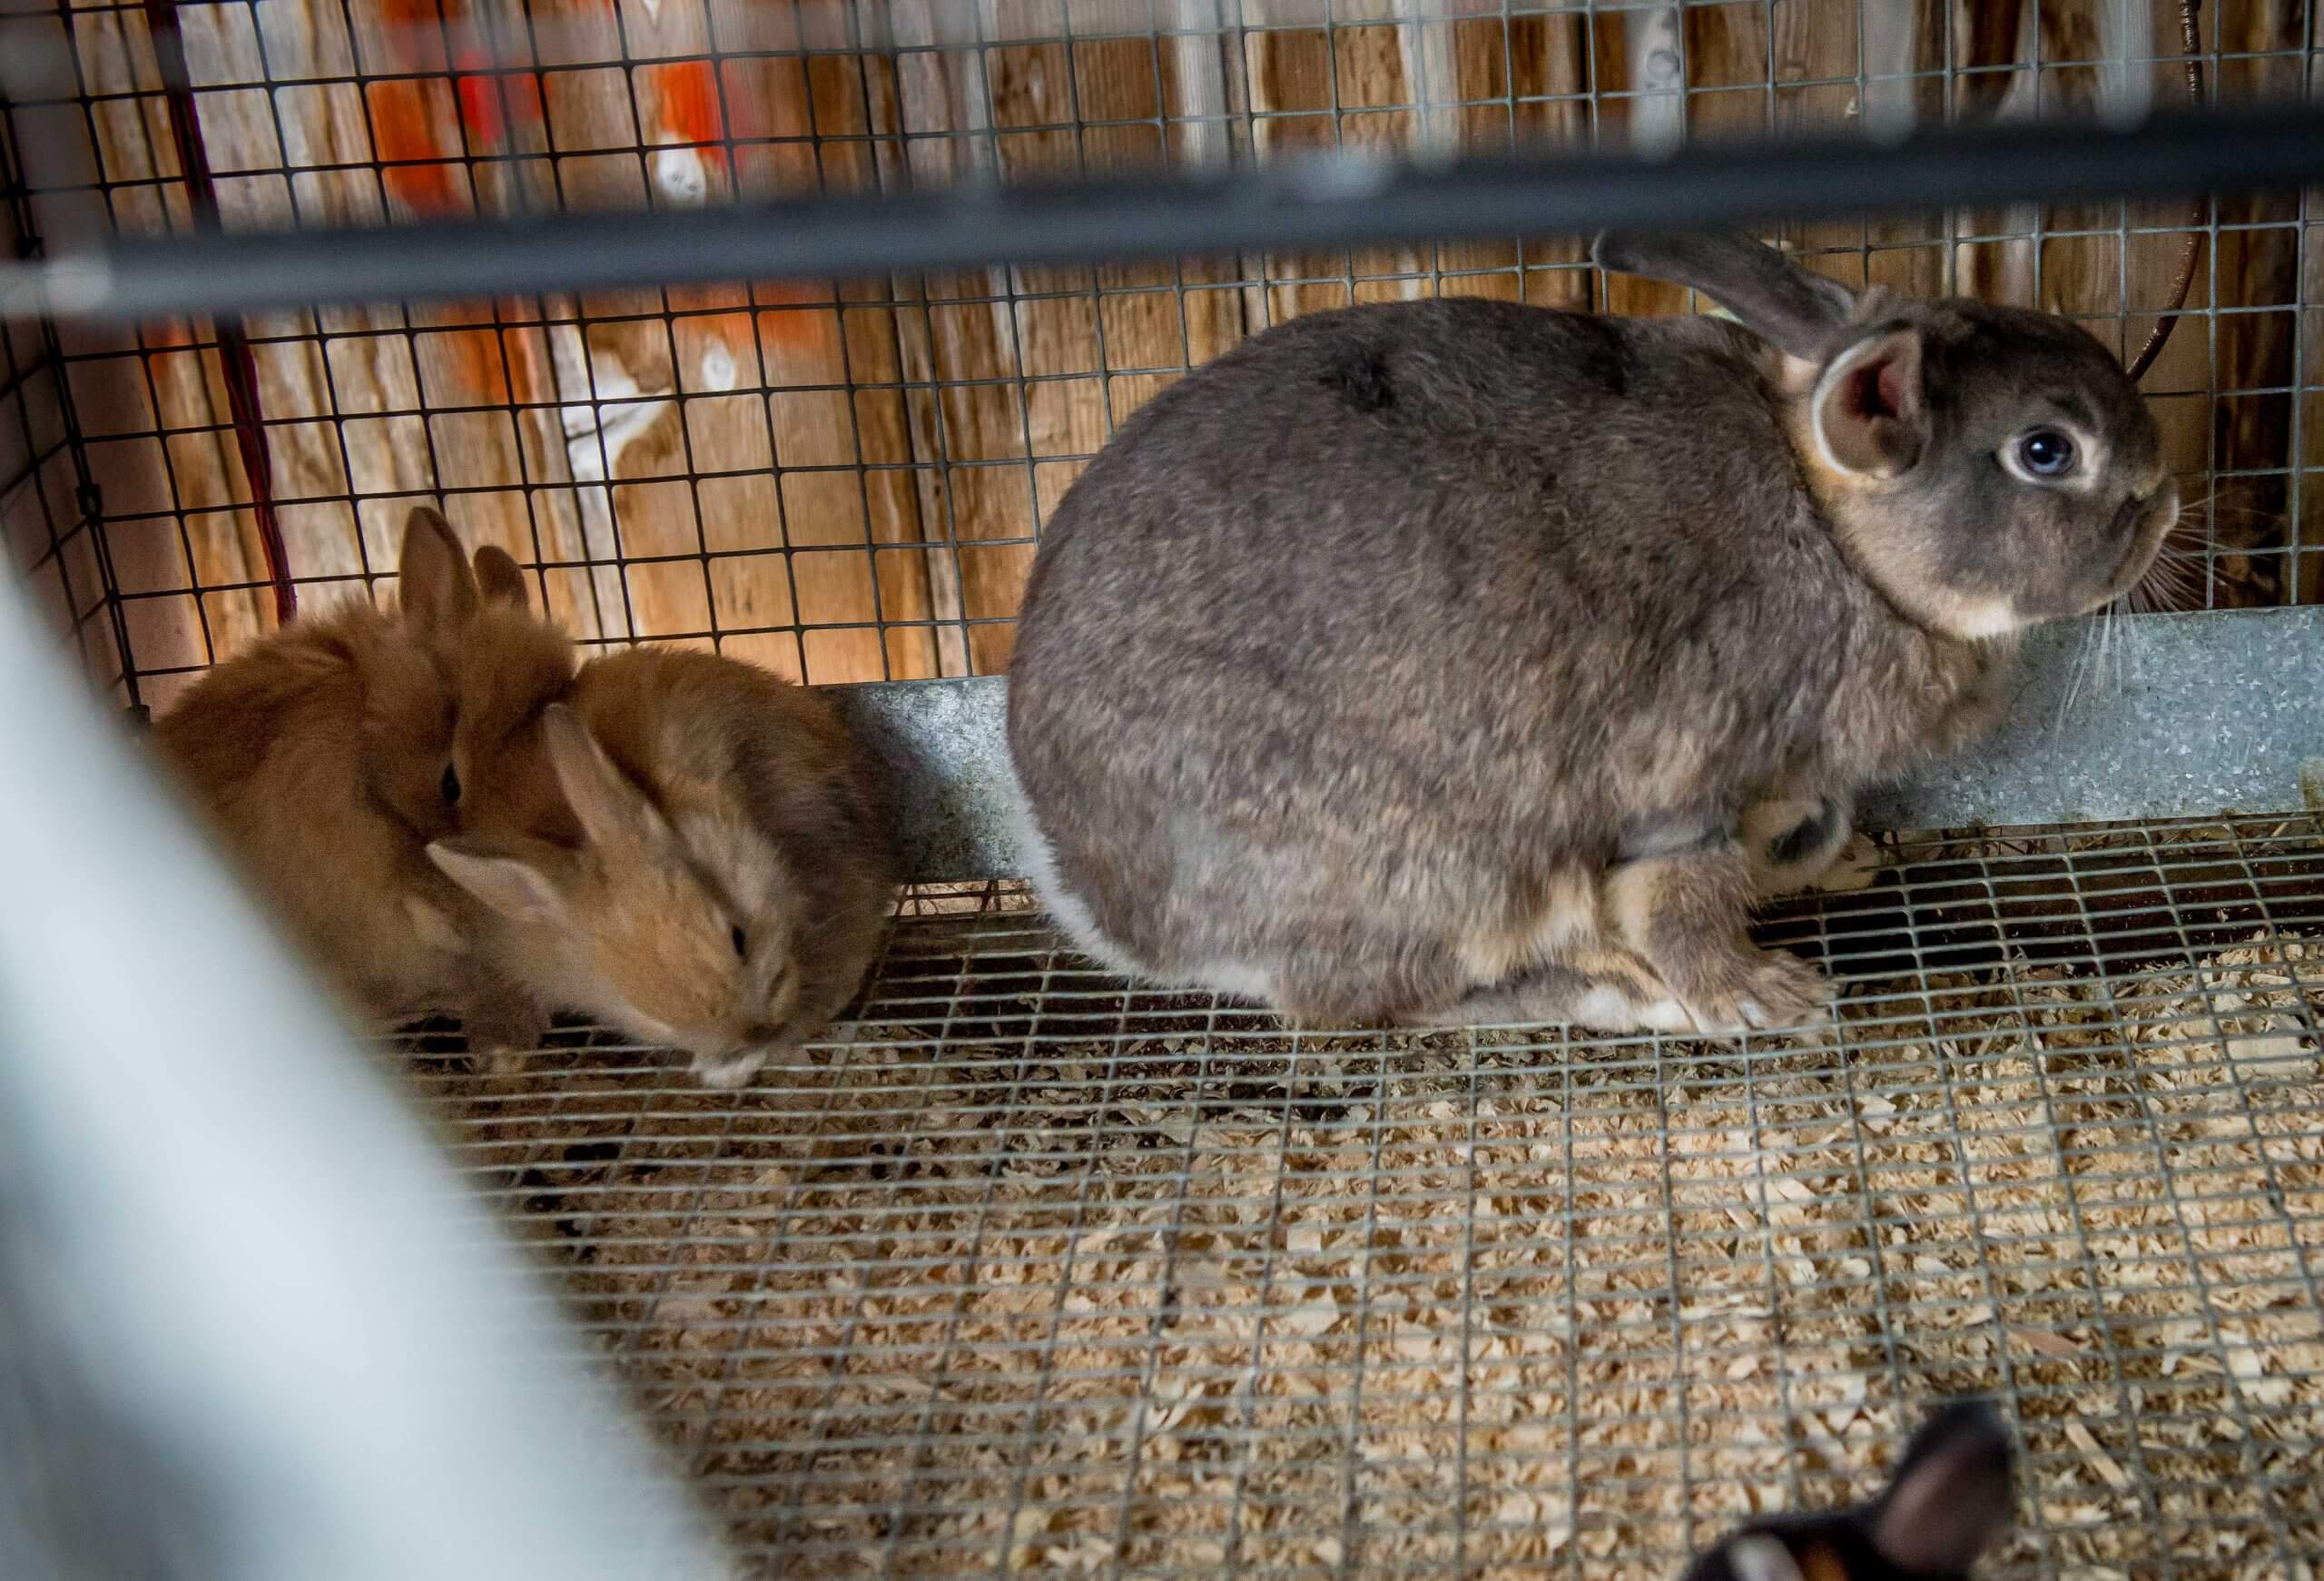 An adult rabbit and two baby rabbits in a wire cage.